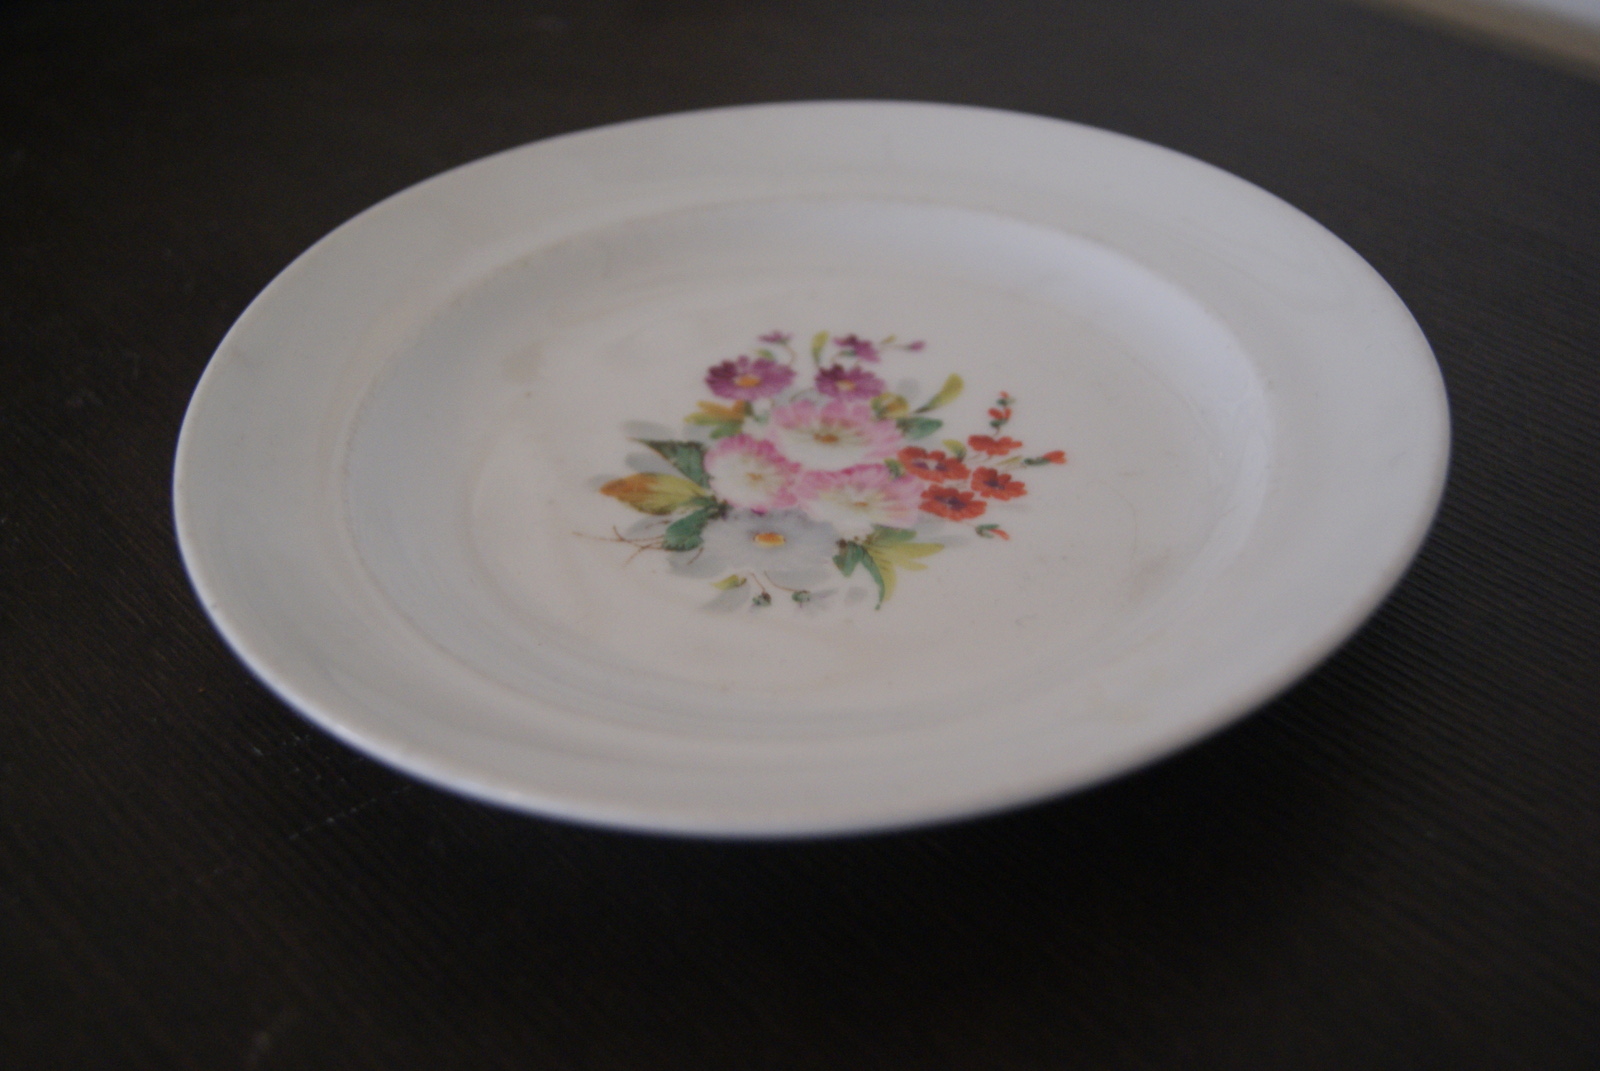 Waldenburg - Altwasser plate with bouquet. Red, white, purple, pink flowers and leaves